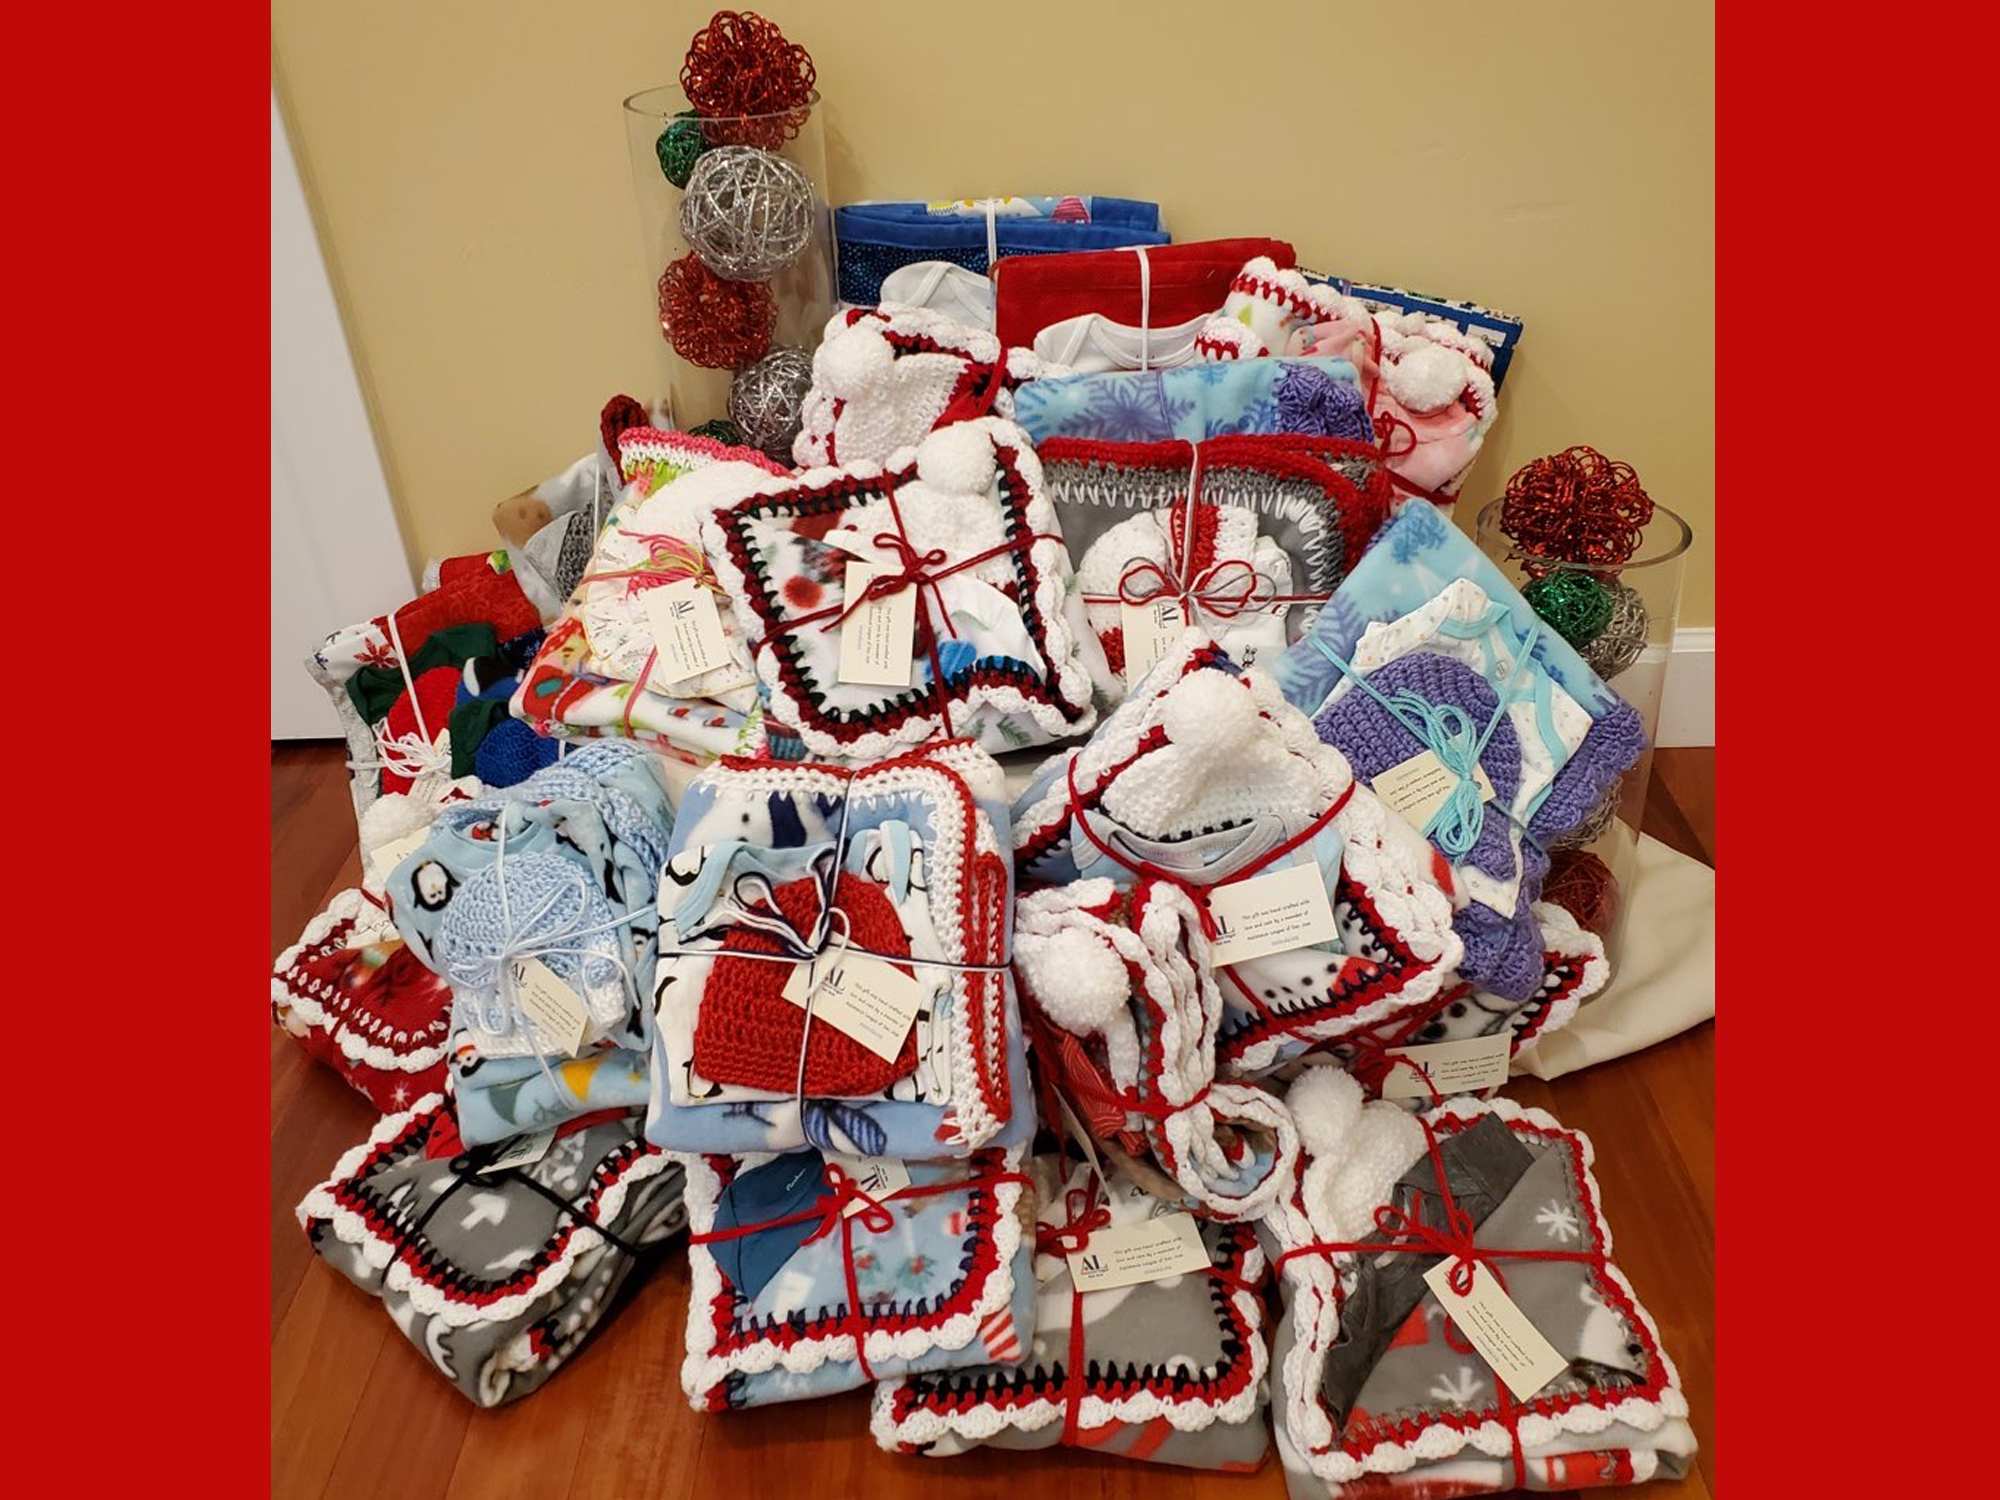 Caring Hands Layettes